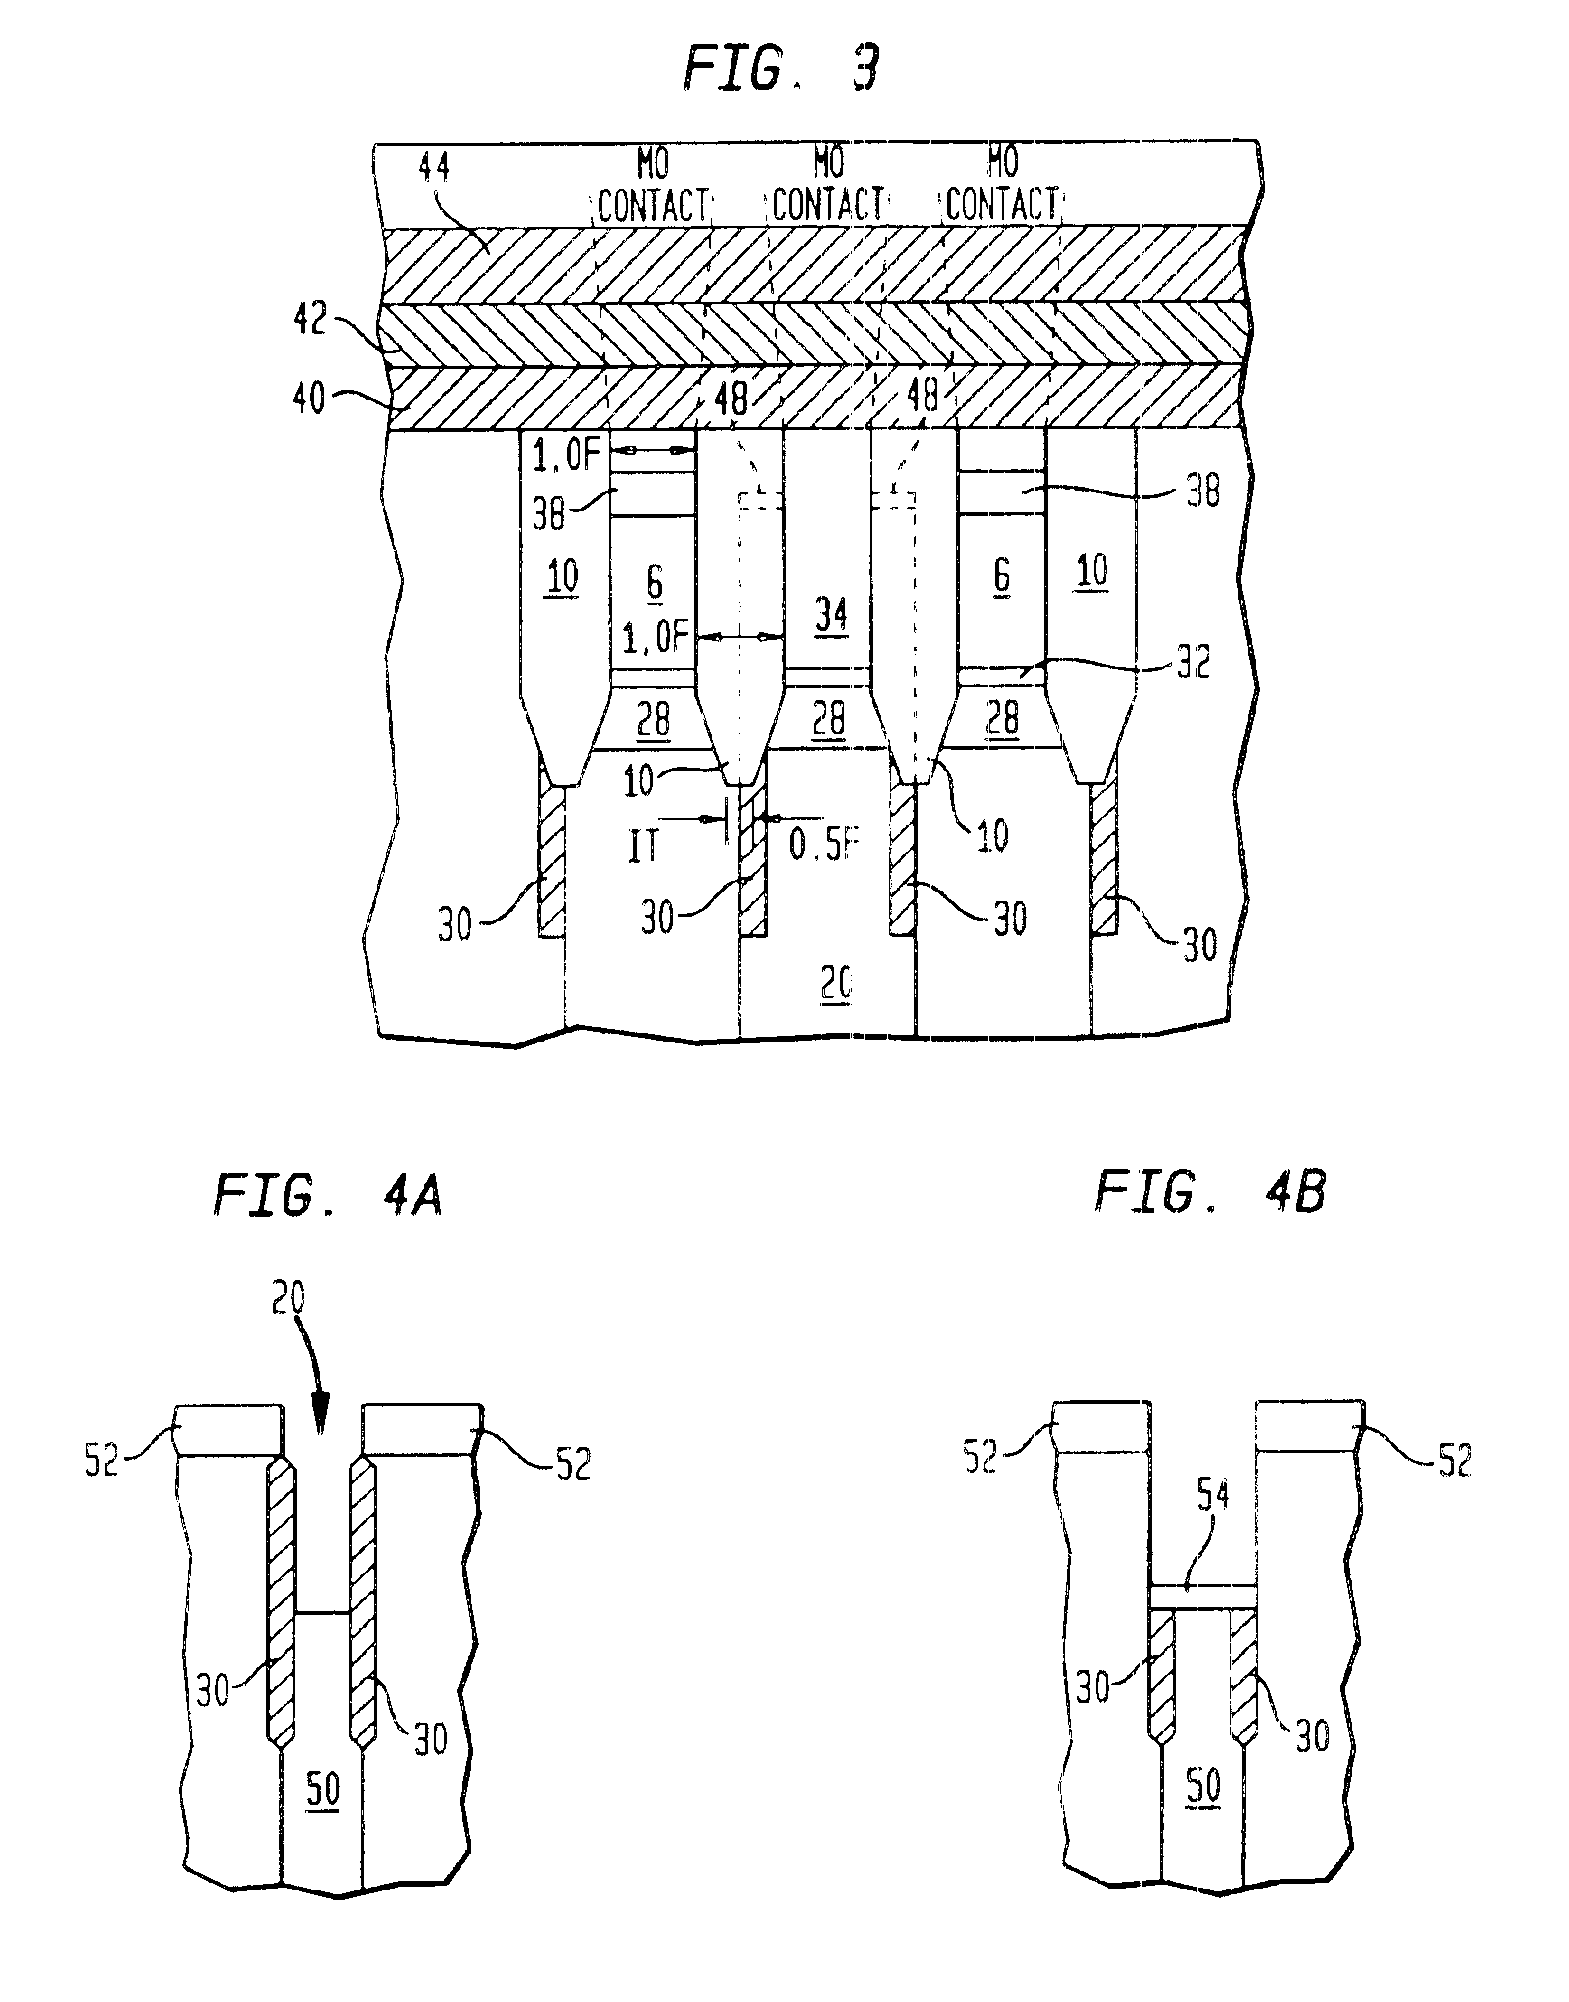 Vertical 8F2 cell dram with active area self-aligned to bit line